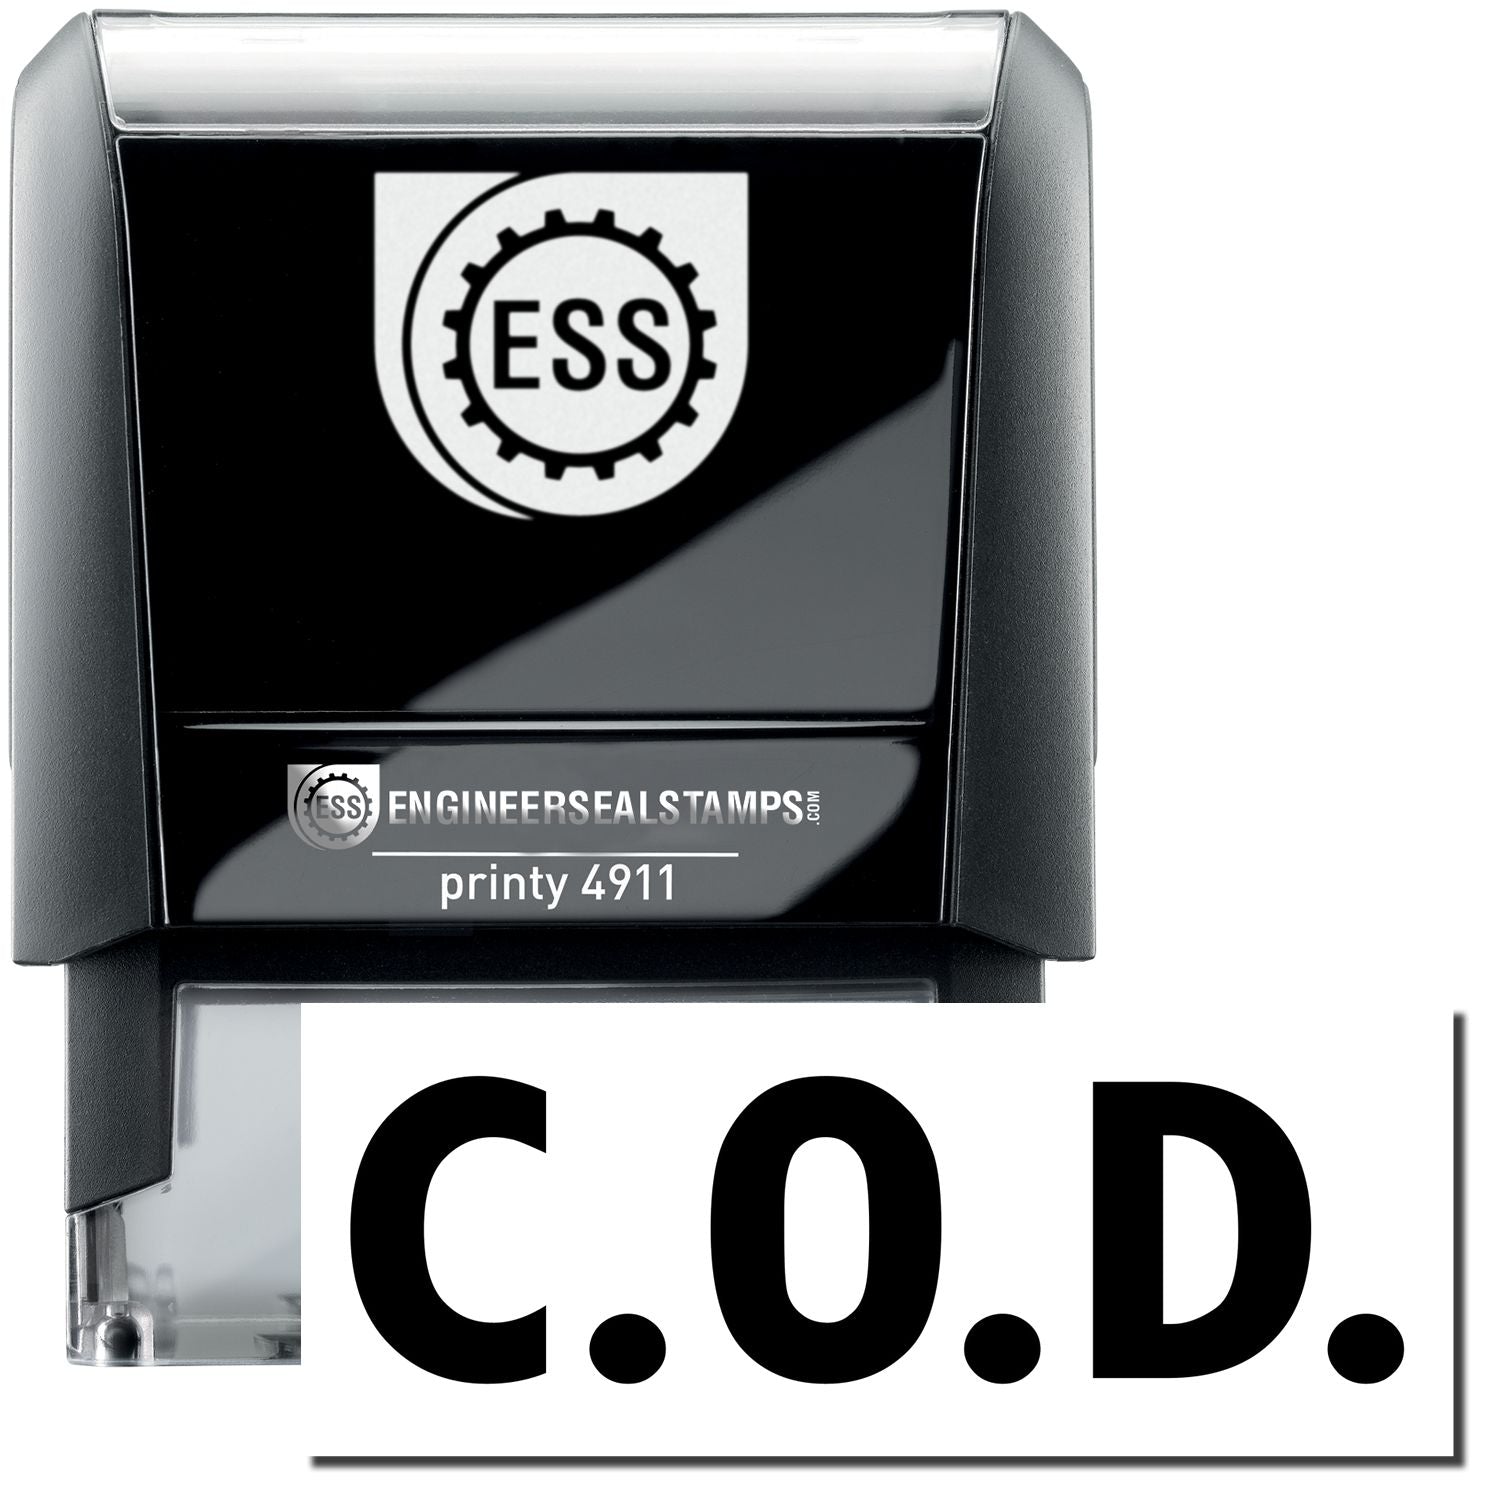 A self-inking stamp with a stamped image showing how the text "C.O.D." is displayed after stamping.